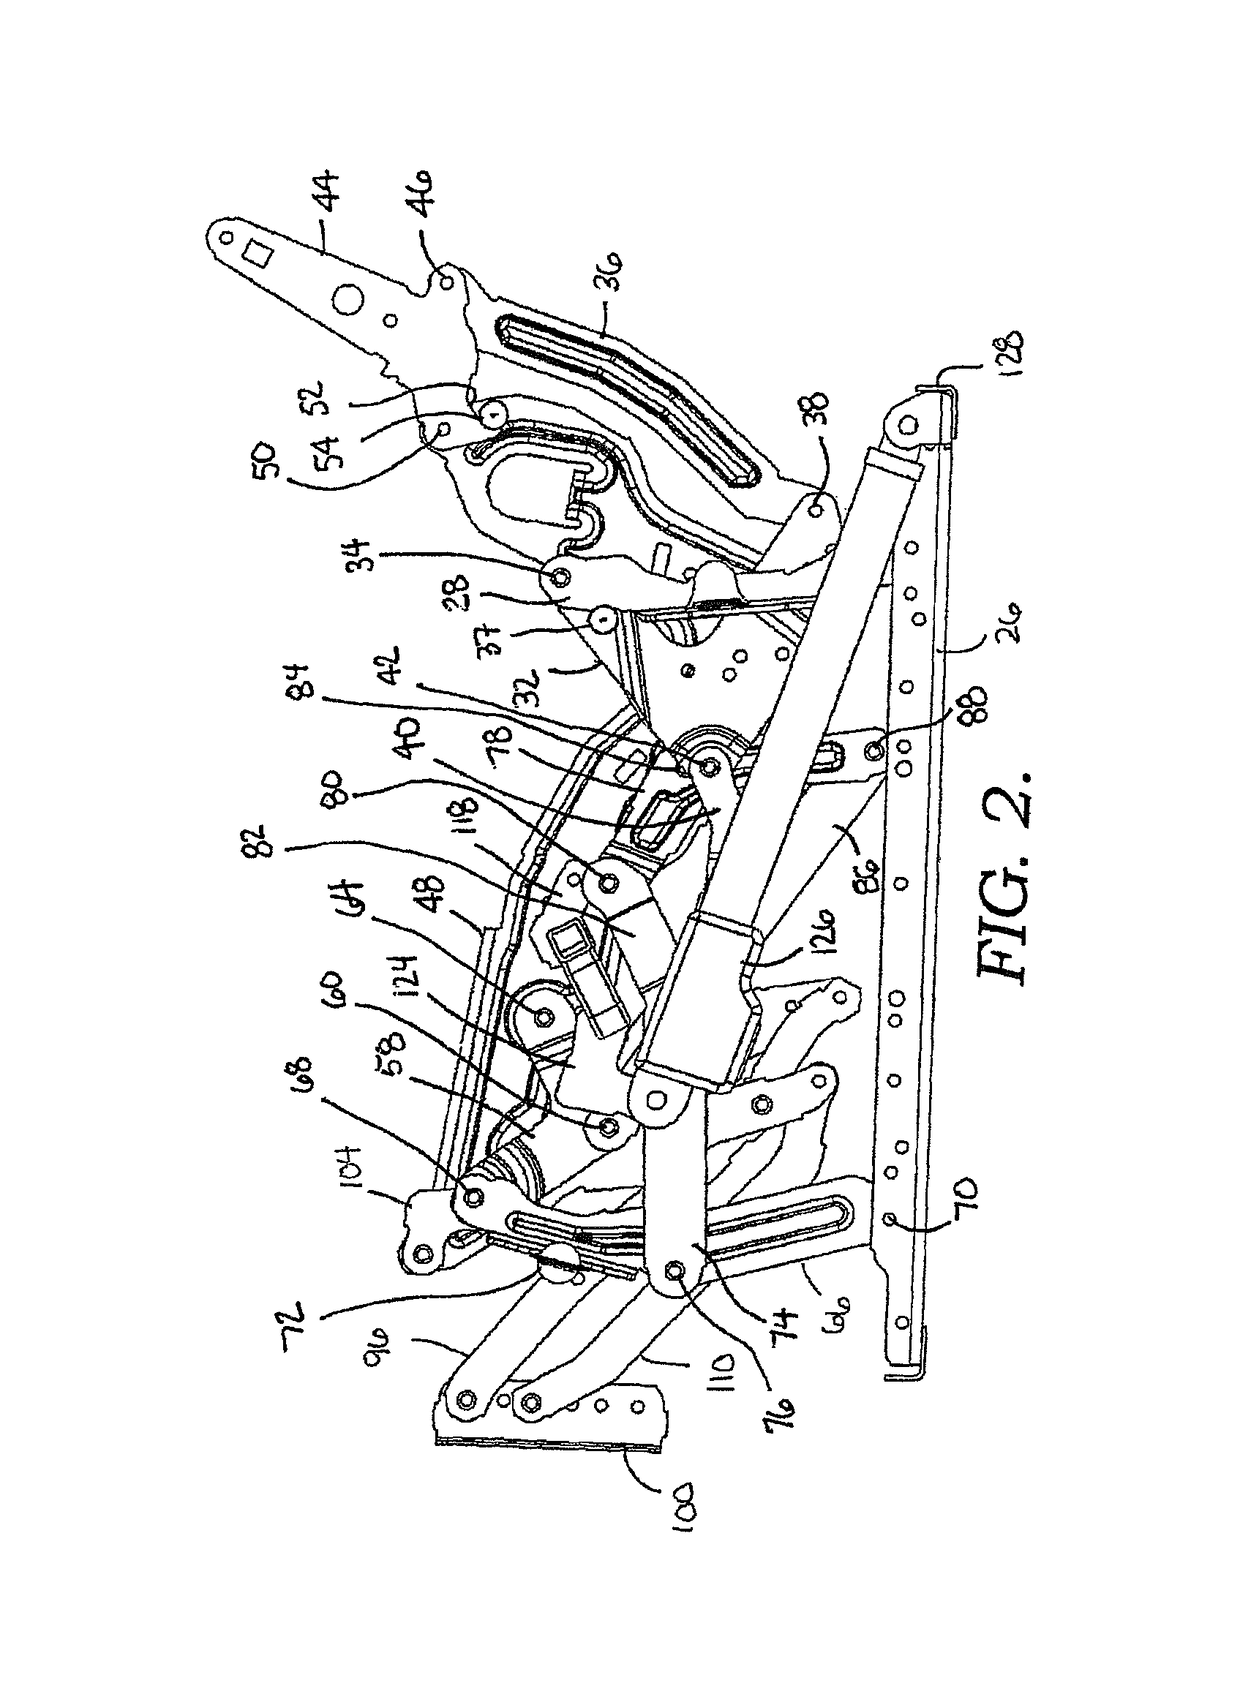 Zero-wall clearance linkage mechanism with power seat drive